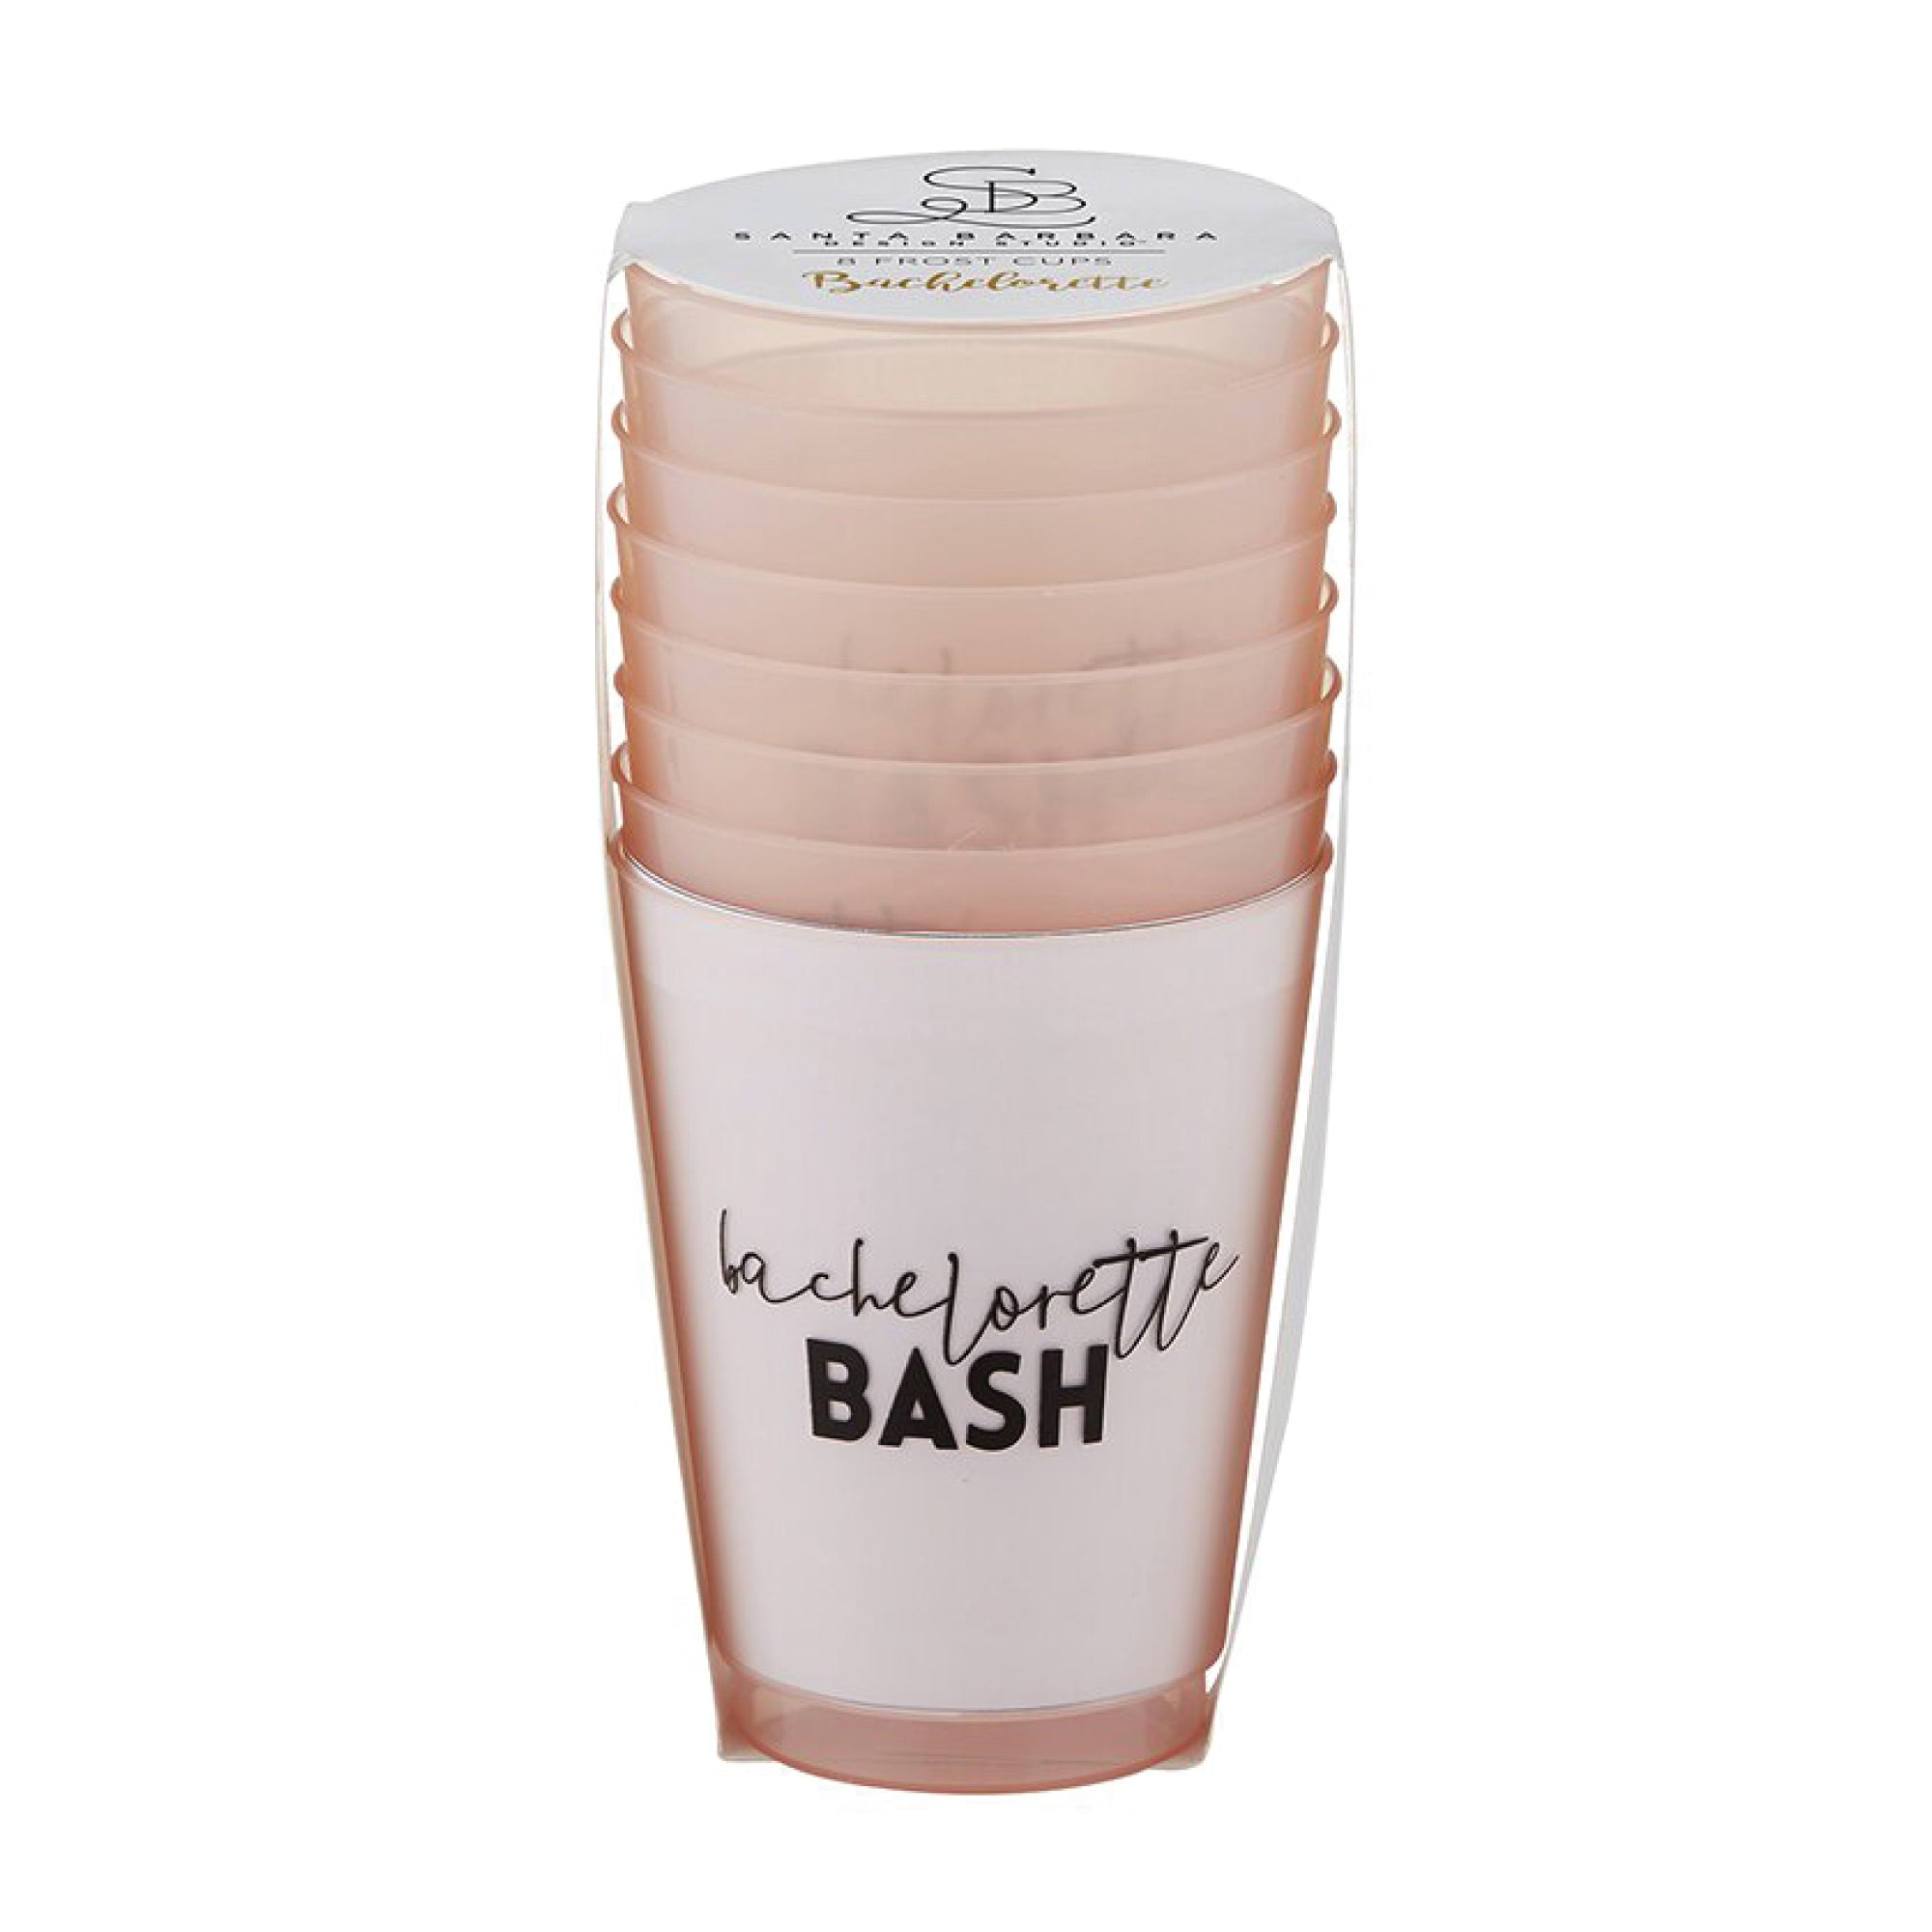 Bachelorette Bash Frosted Plastic Cups 8ct | The Party Darling